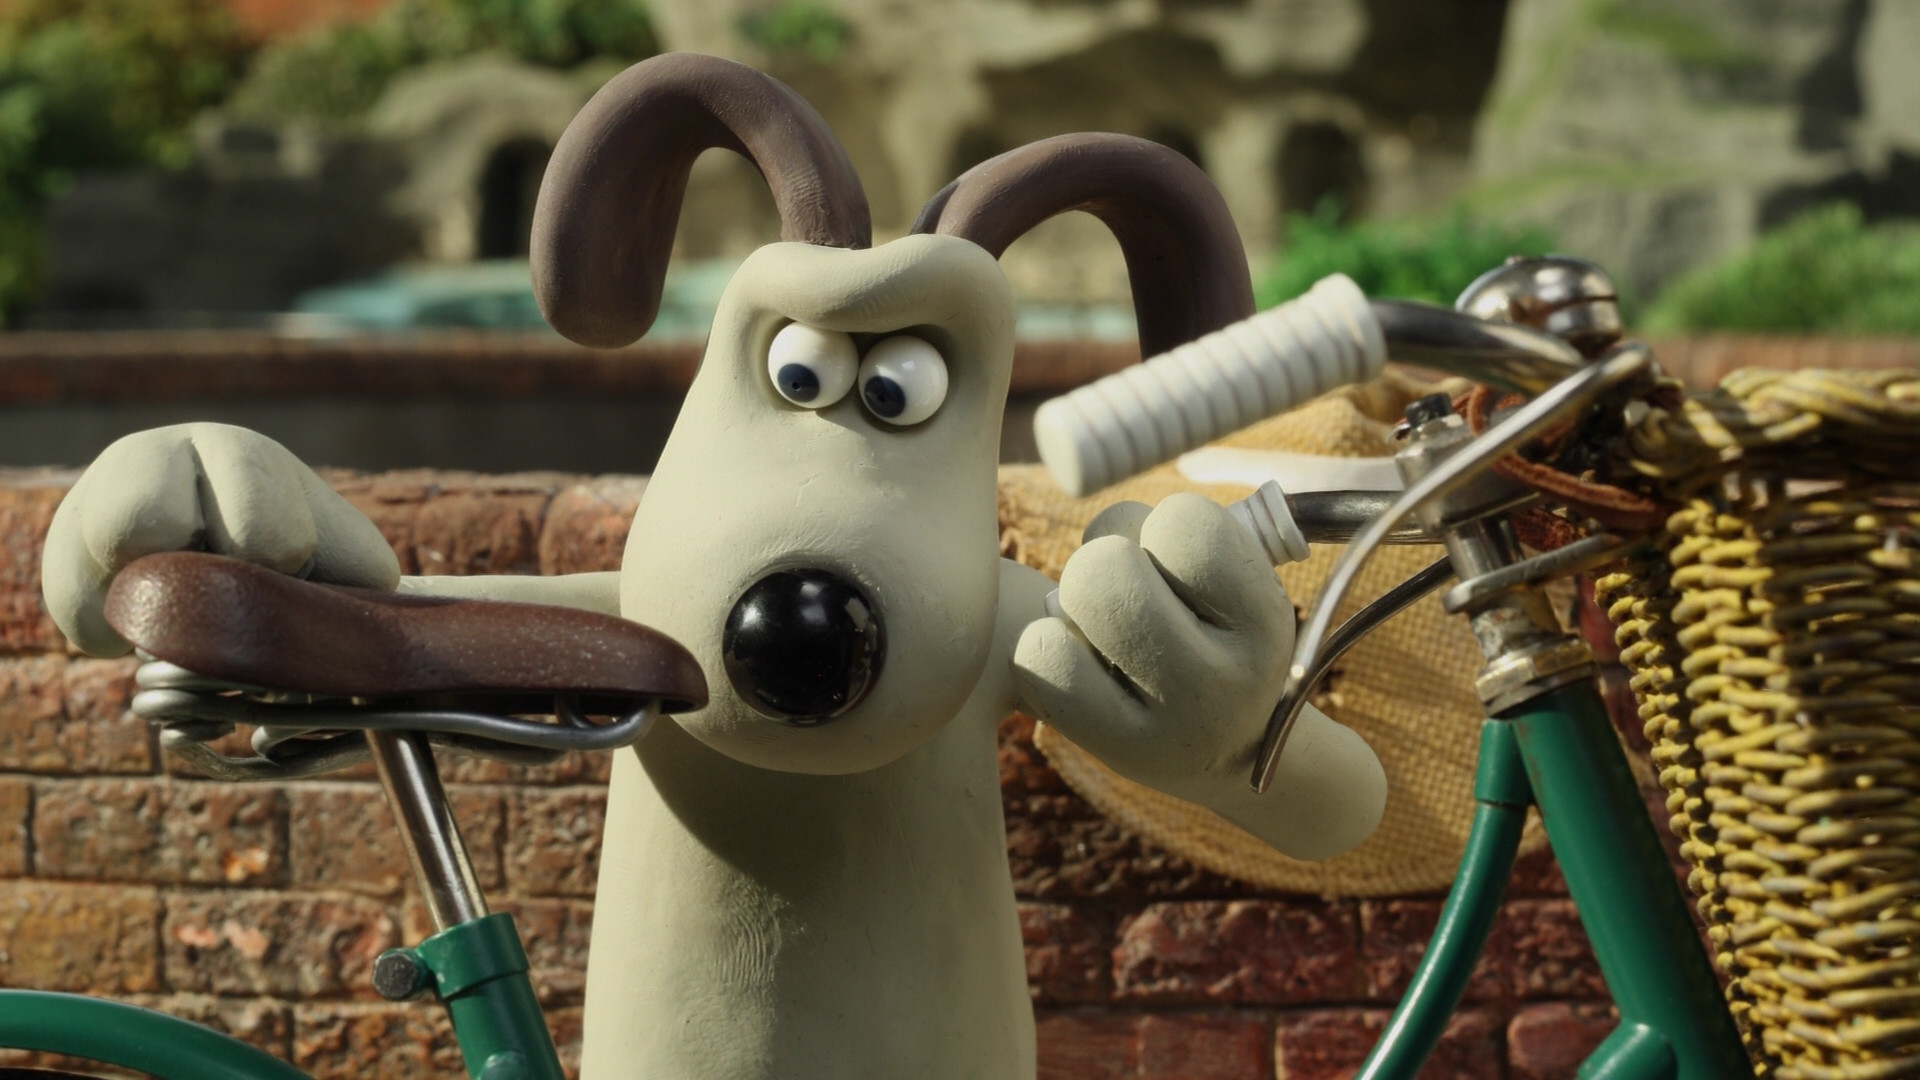 1920x1080 Wallace and Gromit A Matter of Loaf and Death movie rq wallpaper |   | 171682 | WallpaperUP